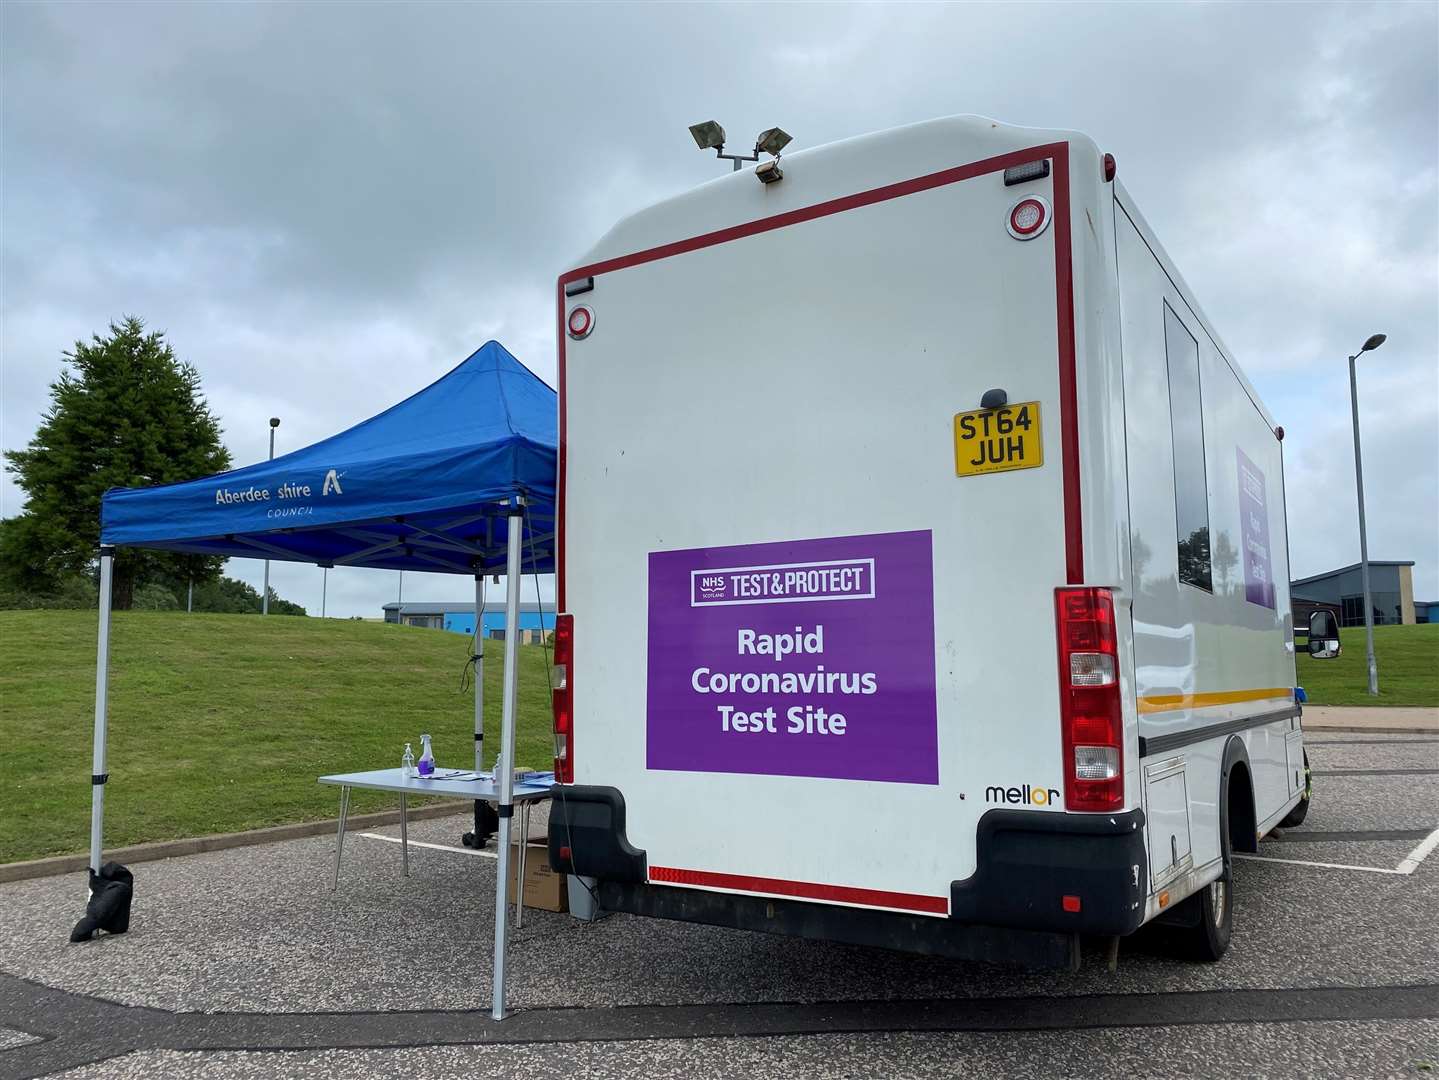 Mobile Covid testing will be available at several locations next week